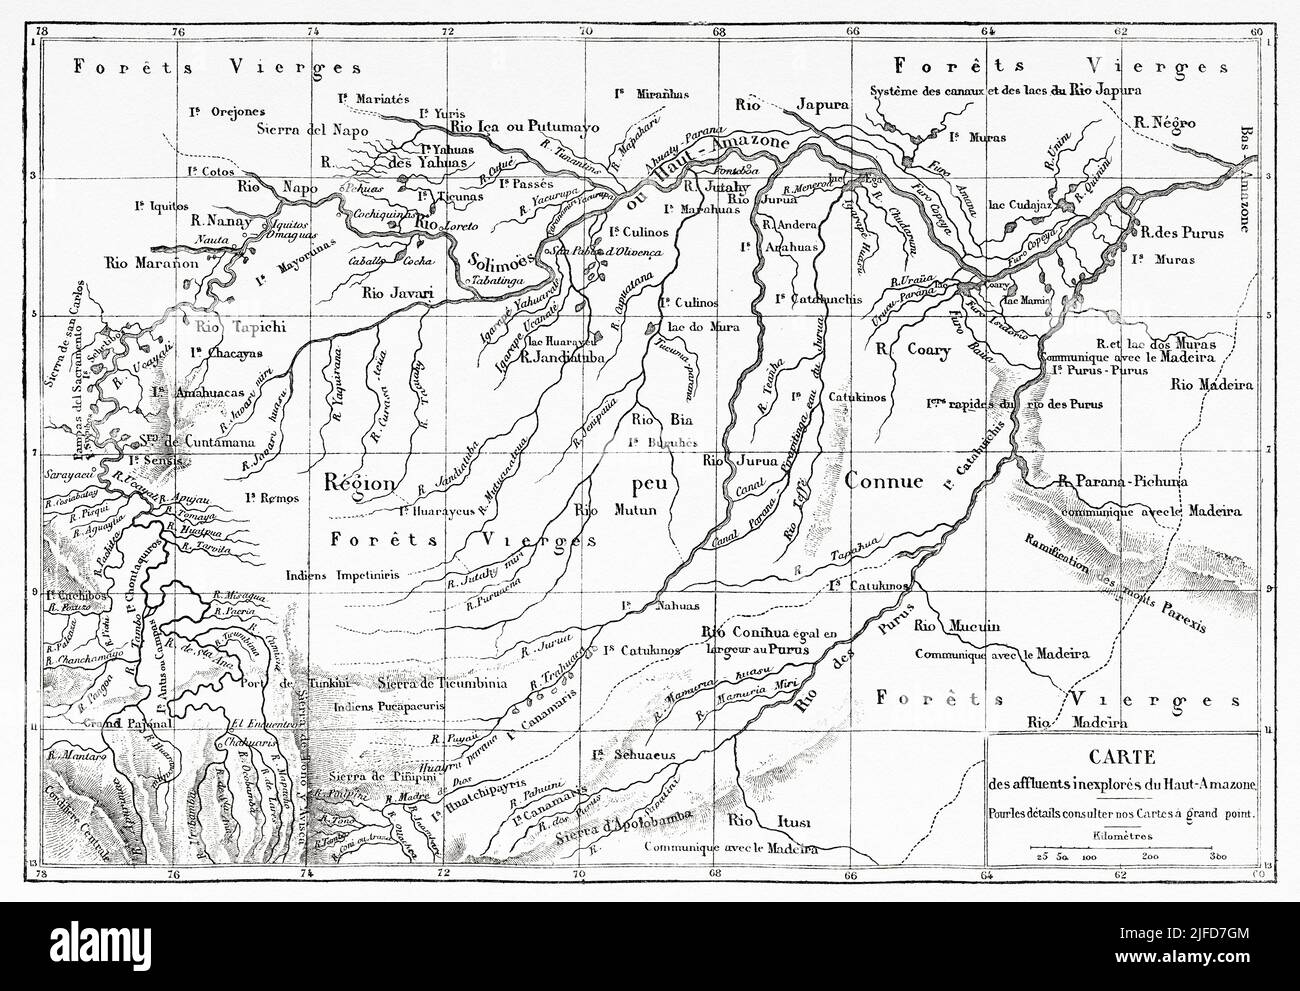 Amazon basin map, Brazil. South America. Journey through South America, from the Pacific Ocean to the Atlantic Ocean by Paul Marcoy 1848-1860 from Le Tour du Monde 1867 Stock Photo